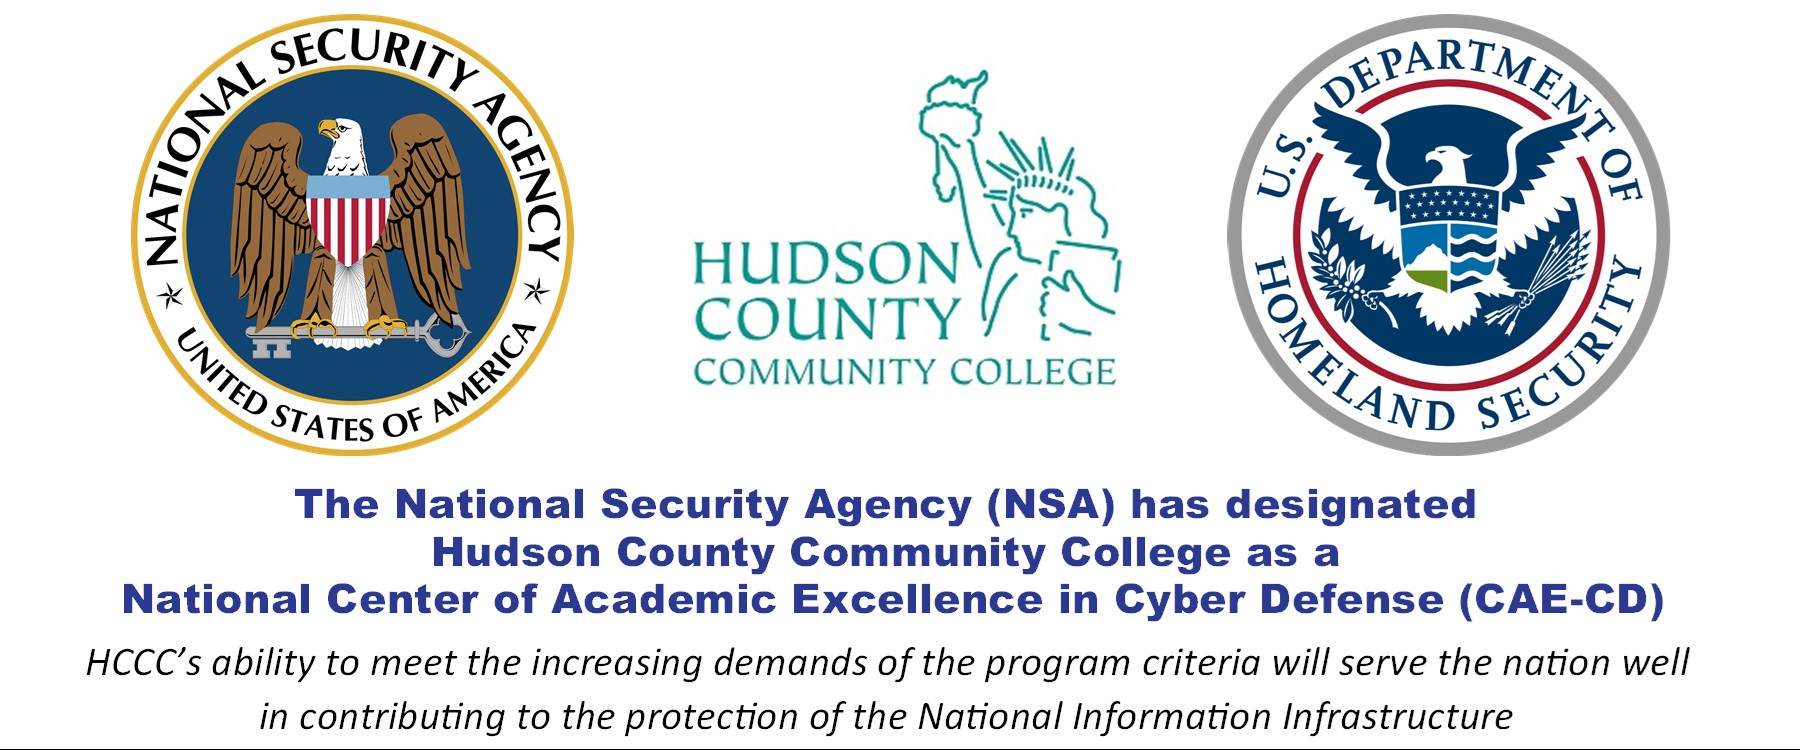 National Security Agency Logo and US Department of Homeland Security Logo - The National Security Agency (NSA) has designated Hudson County Community College as a National Center of Academic Excellence in Cyber Defense (CAE-CD) HCCC's ability to meet the increasing demands of the program criteria will serve the nation well in contributing to the protection of the National Information Infrastructure